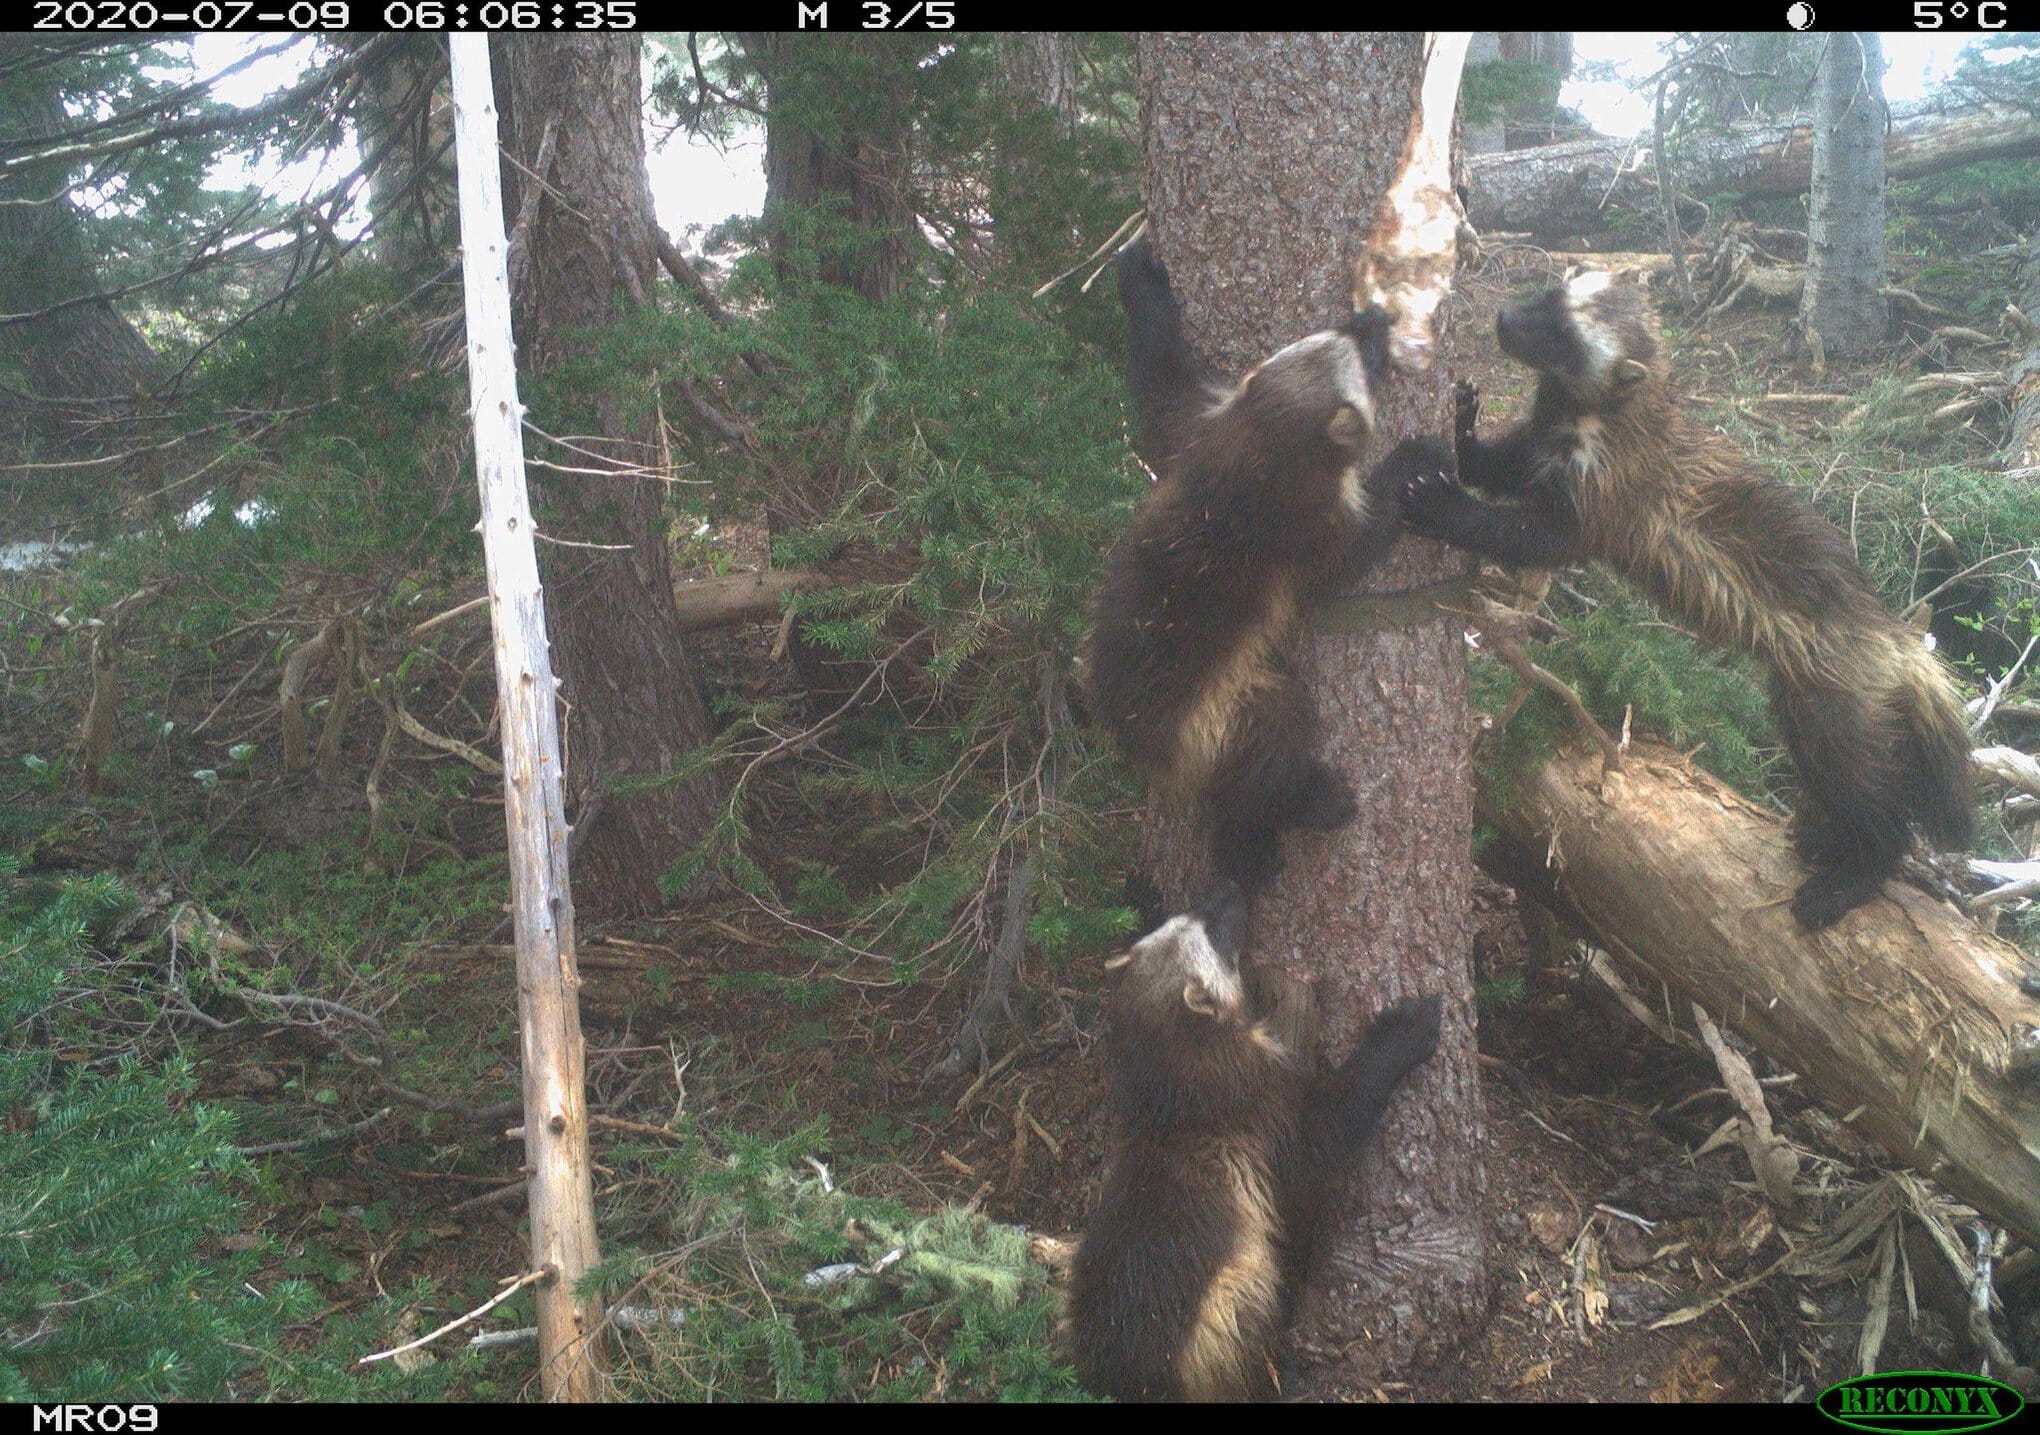 Mount Rainier National Park is once again home to wolverines, after a more than 100-year hiatus.